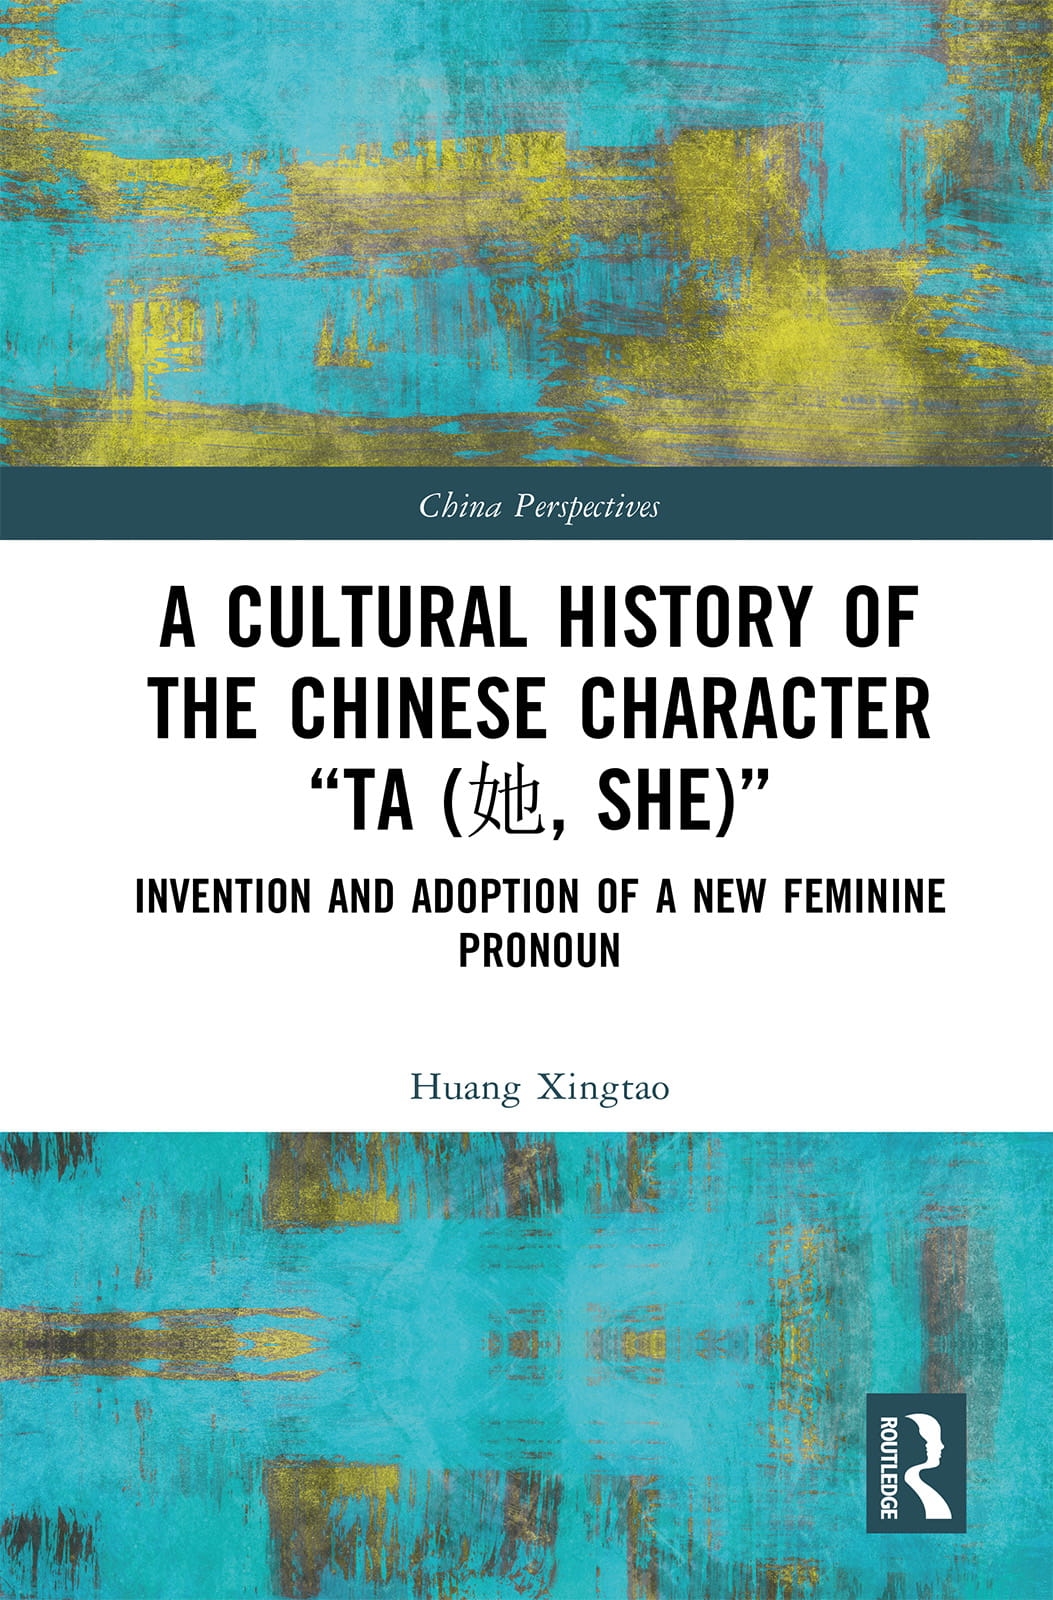 A Cultural History of the Chinese Character Ta (她, She): Invention and Adoption of a New Feminine Pronoun